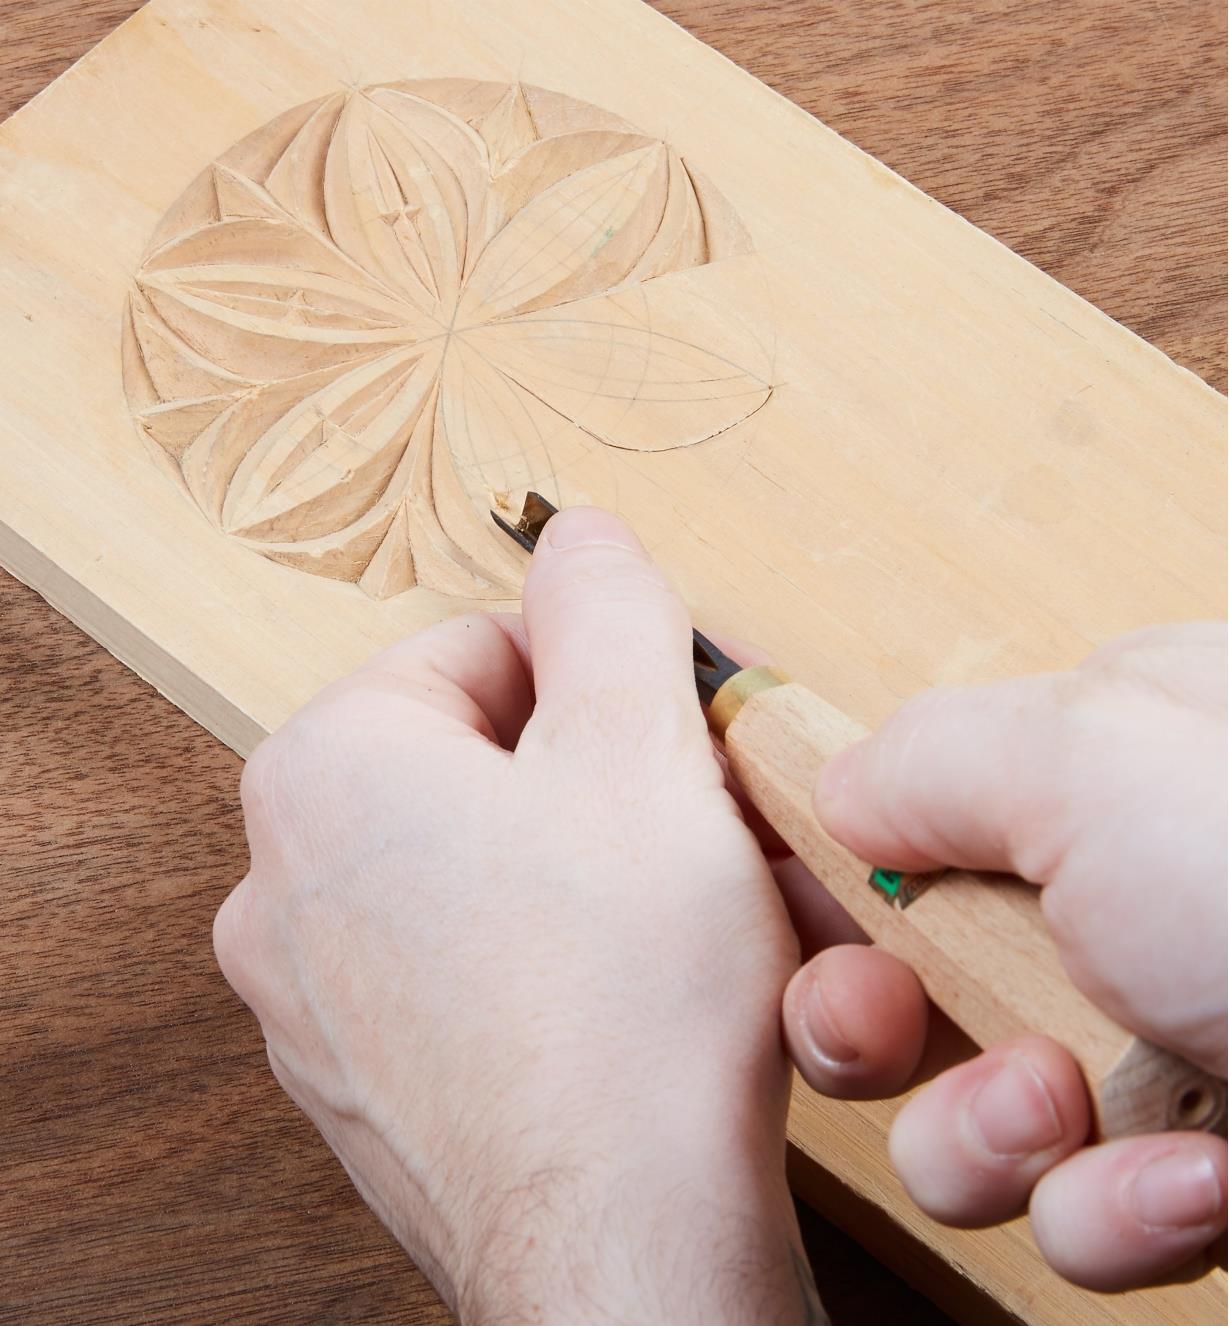 Using a gouge to remove wood in a relief carving